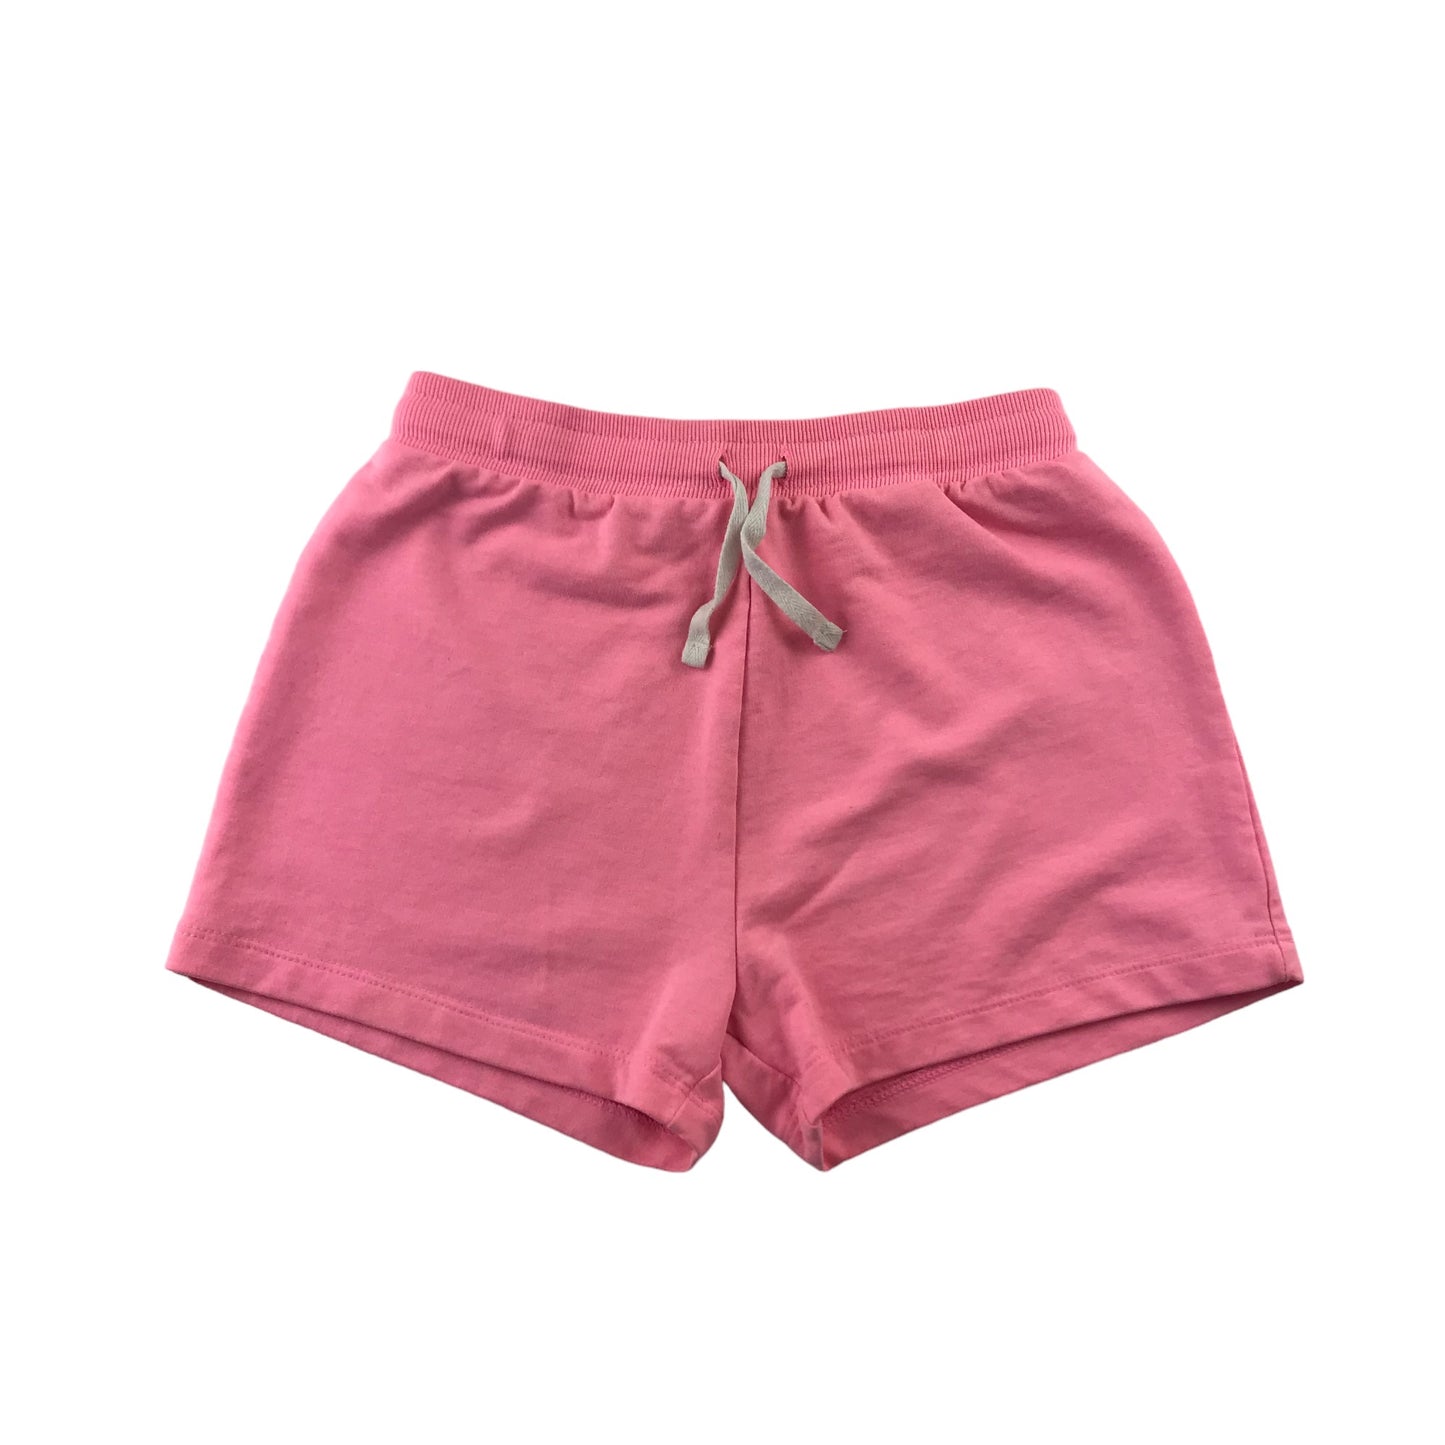 George Shorts Set Age 10 Pink and Grey Print Pattern Jersey